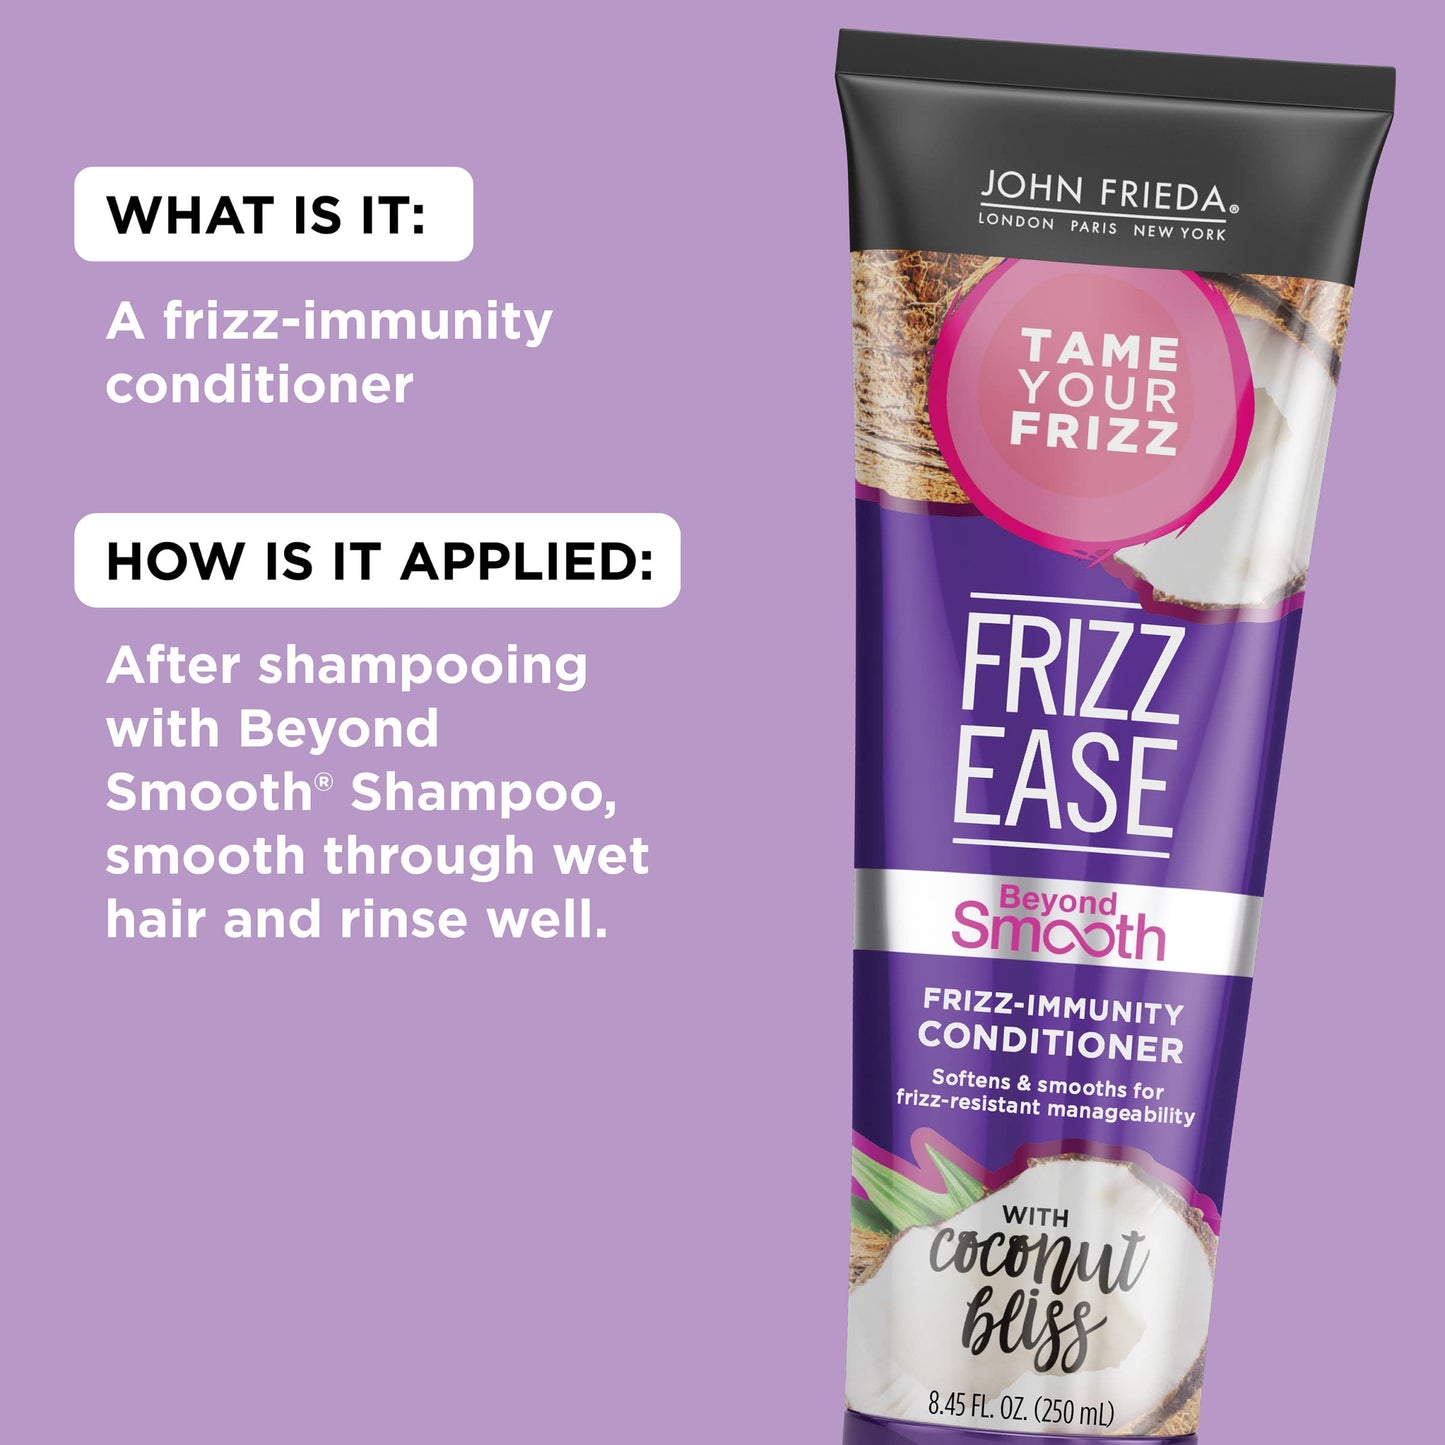 John Frieda Frizz Ease Beyond Smooth Frizz-Immunity Conditioner, 8.45 Ounces, Anti-Humidity Conditioner, Prevents Frizz, with Pure Coconut Oil